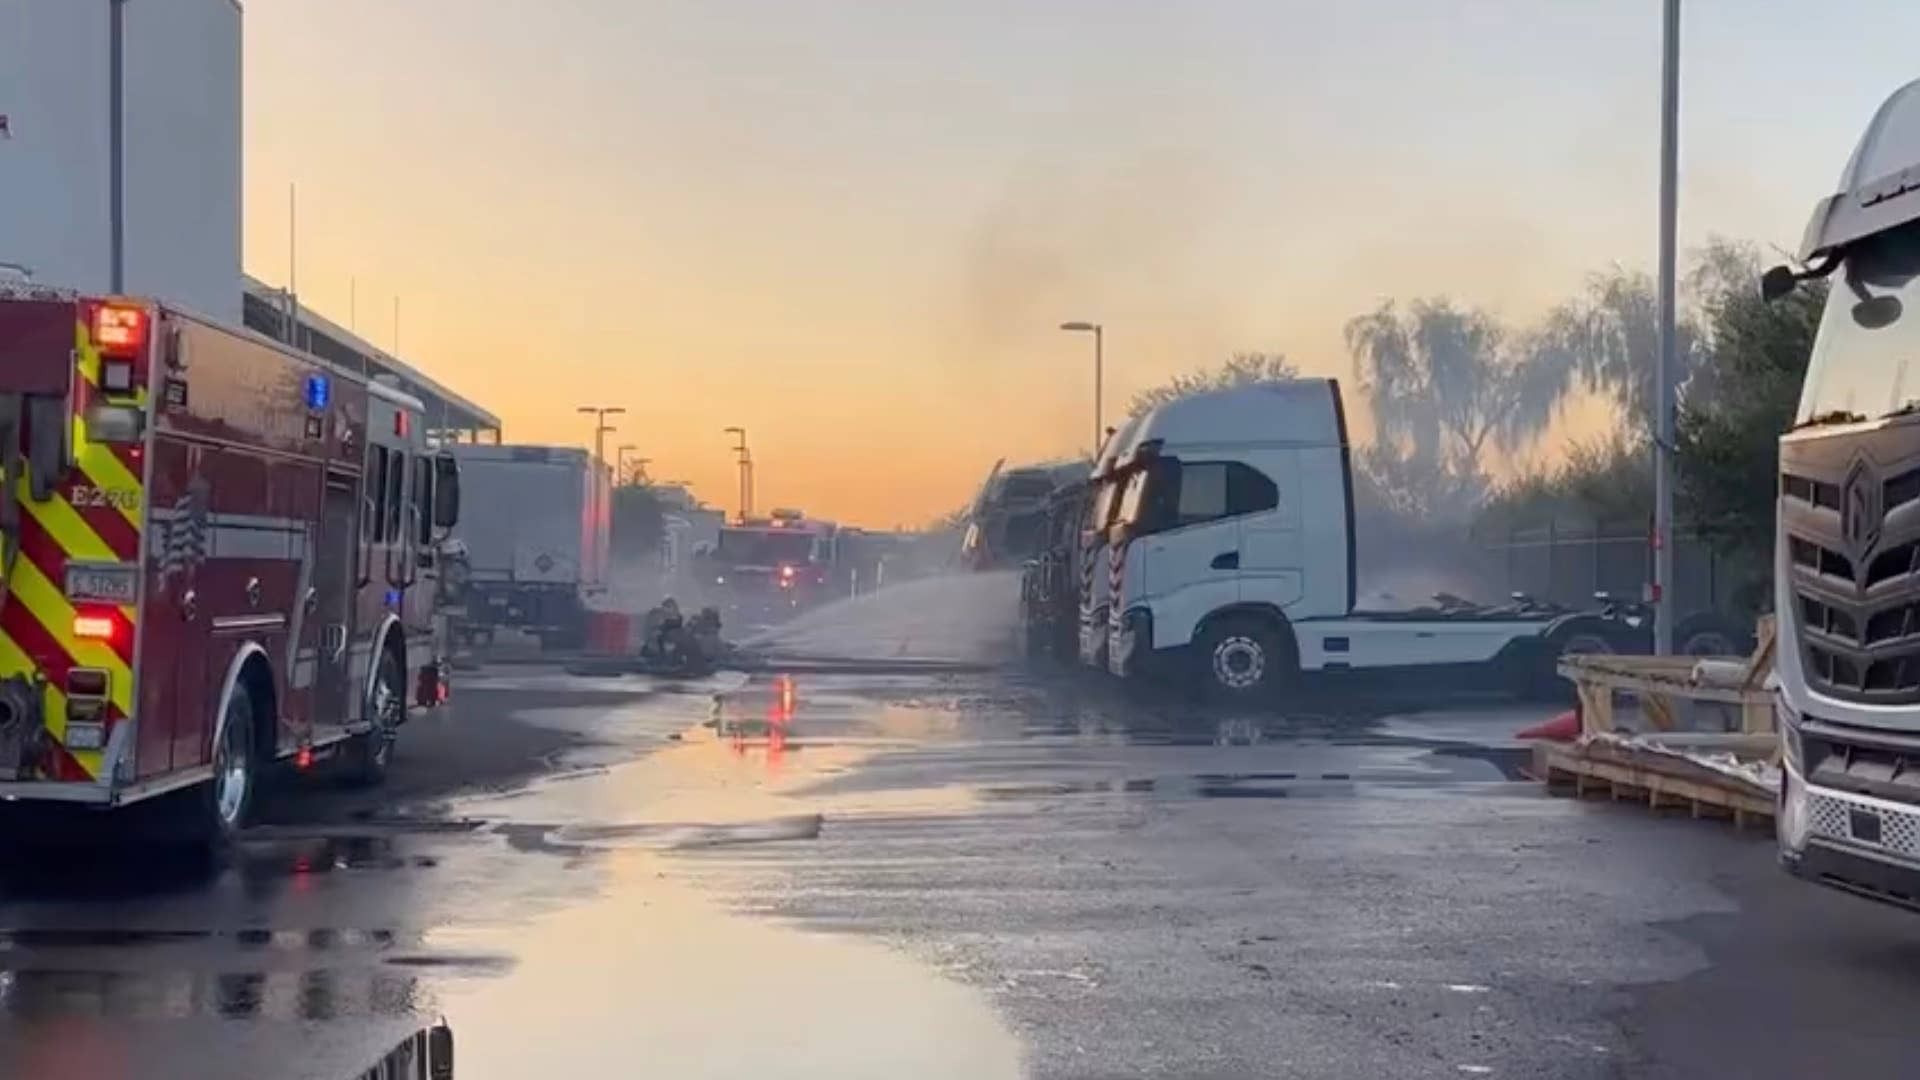 Nikola Claimed ‘Foul Play’ Over Scorched Trucks. Fire Dept. Finds ‘No Evidence at All of Arson’